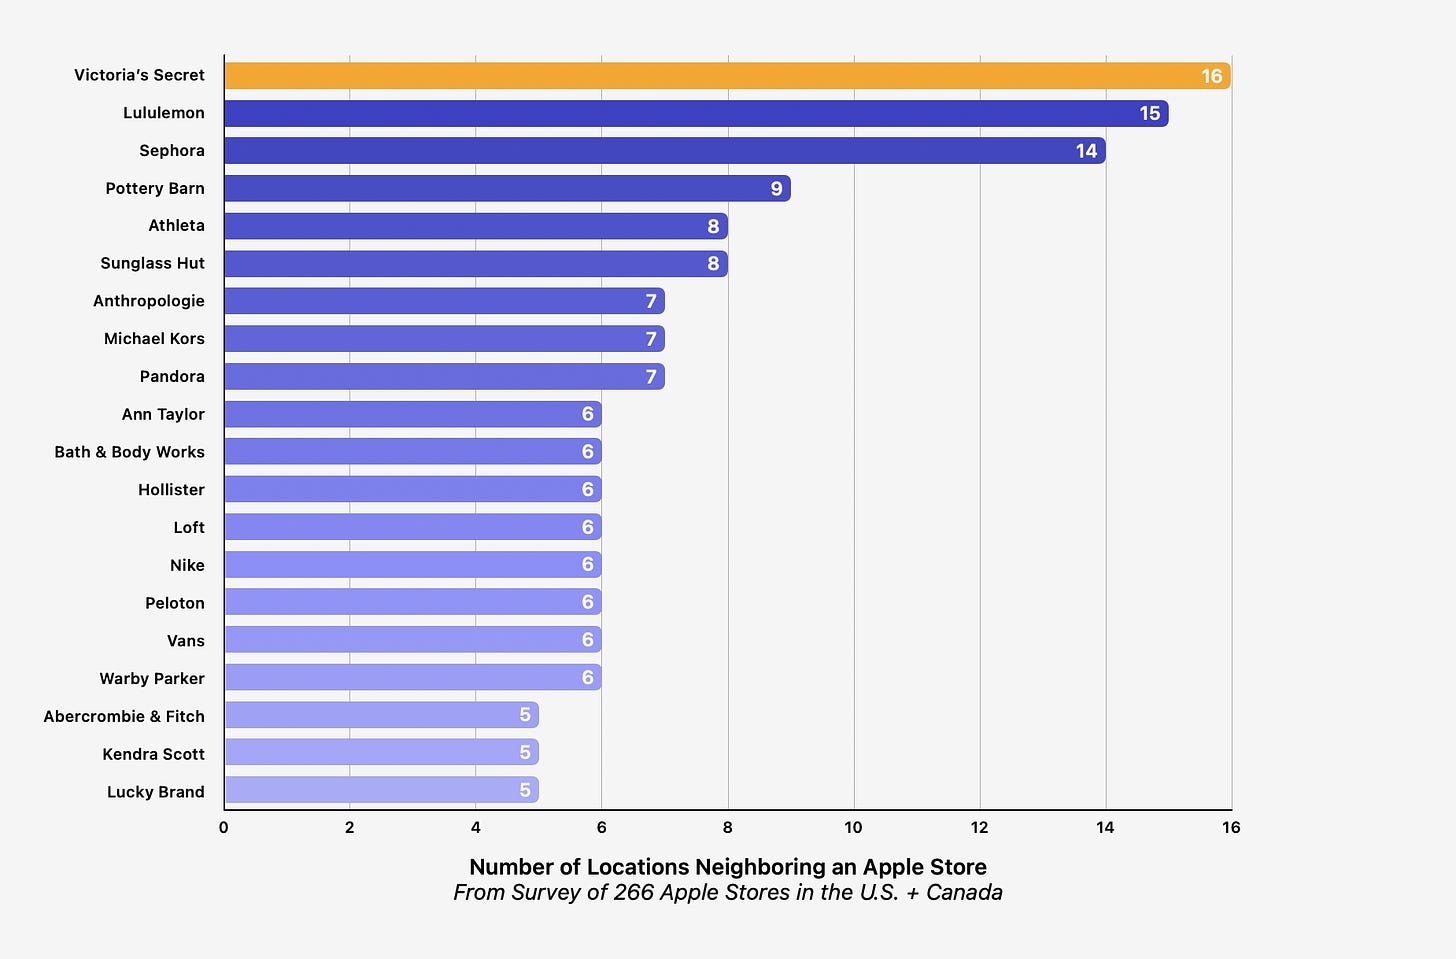 Bar chart: Number of locations neighboring an Apple Store.